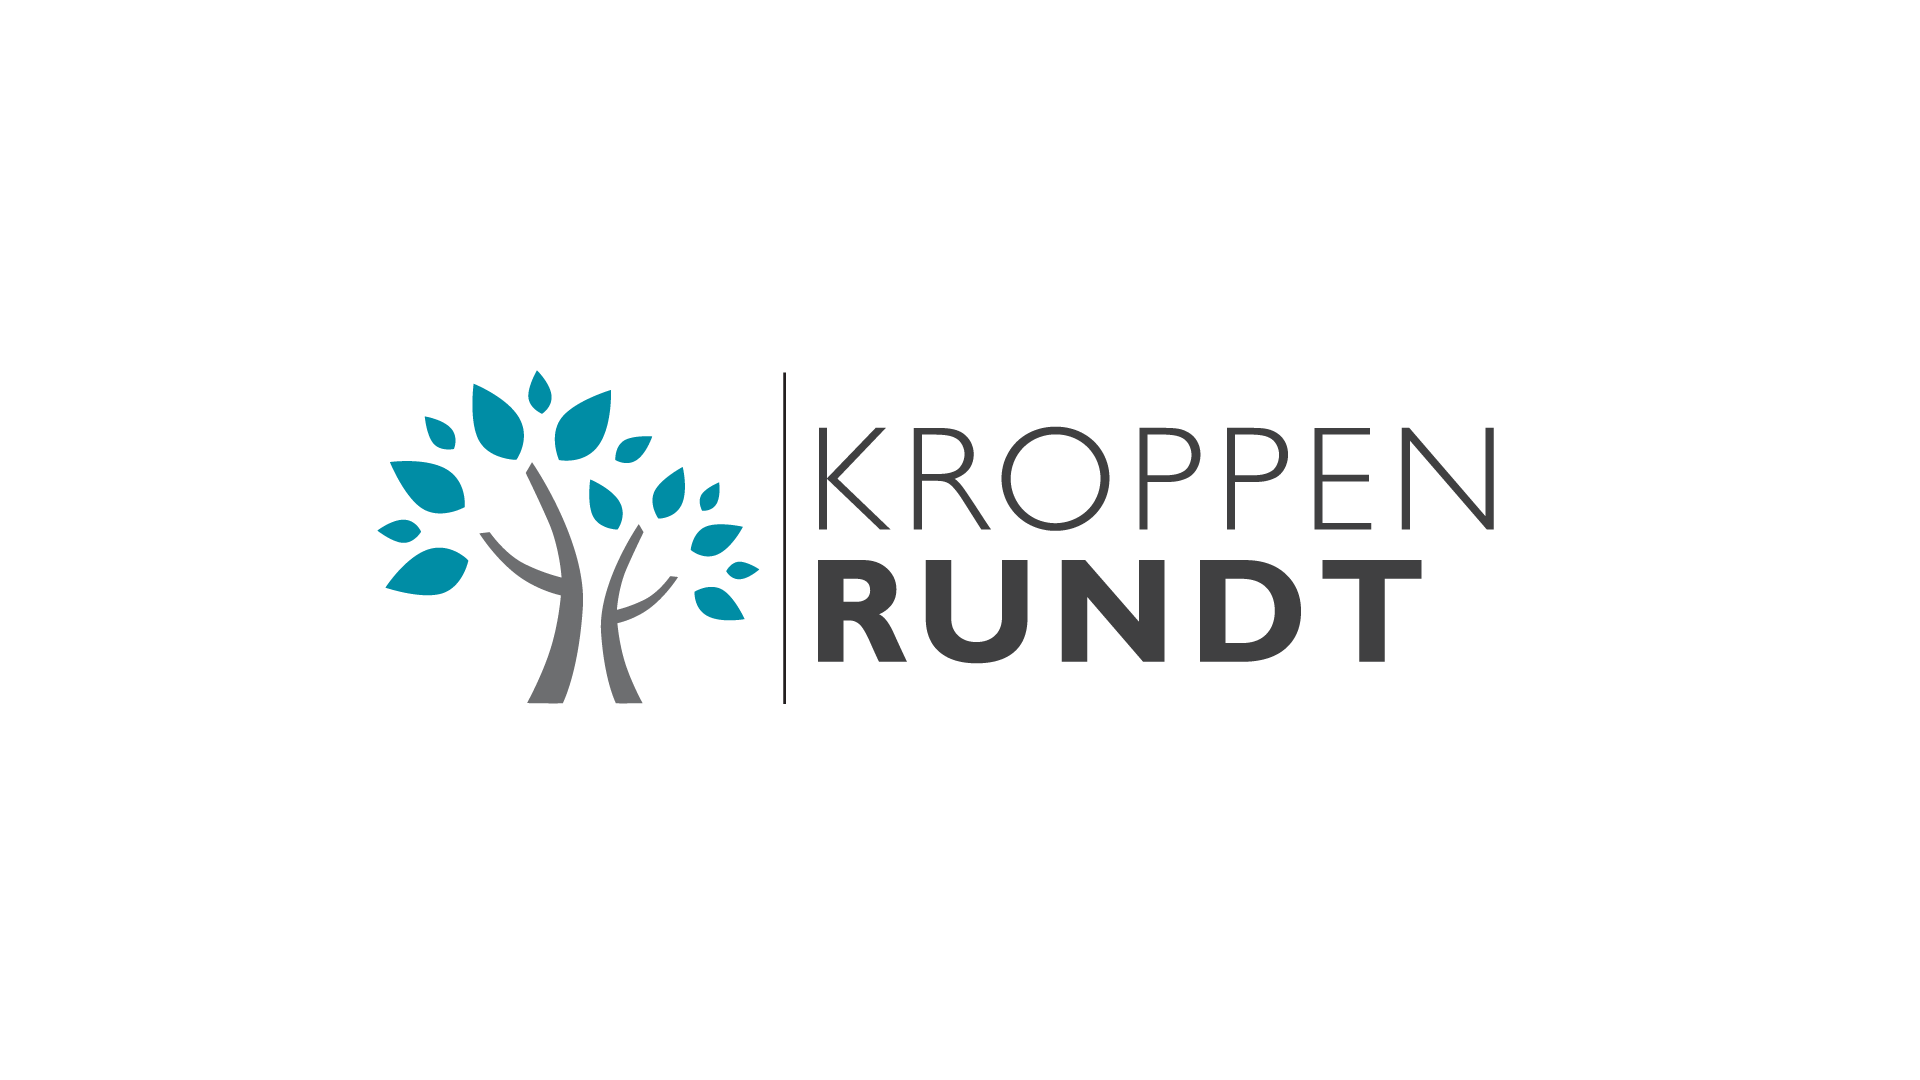 A blue tree with a text that reads 'Kroppen Rundt'.